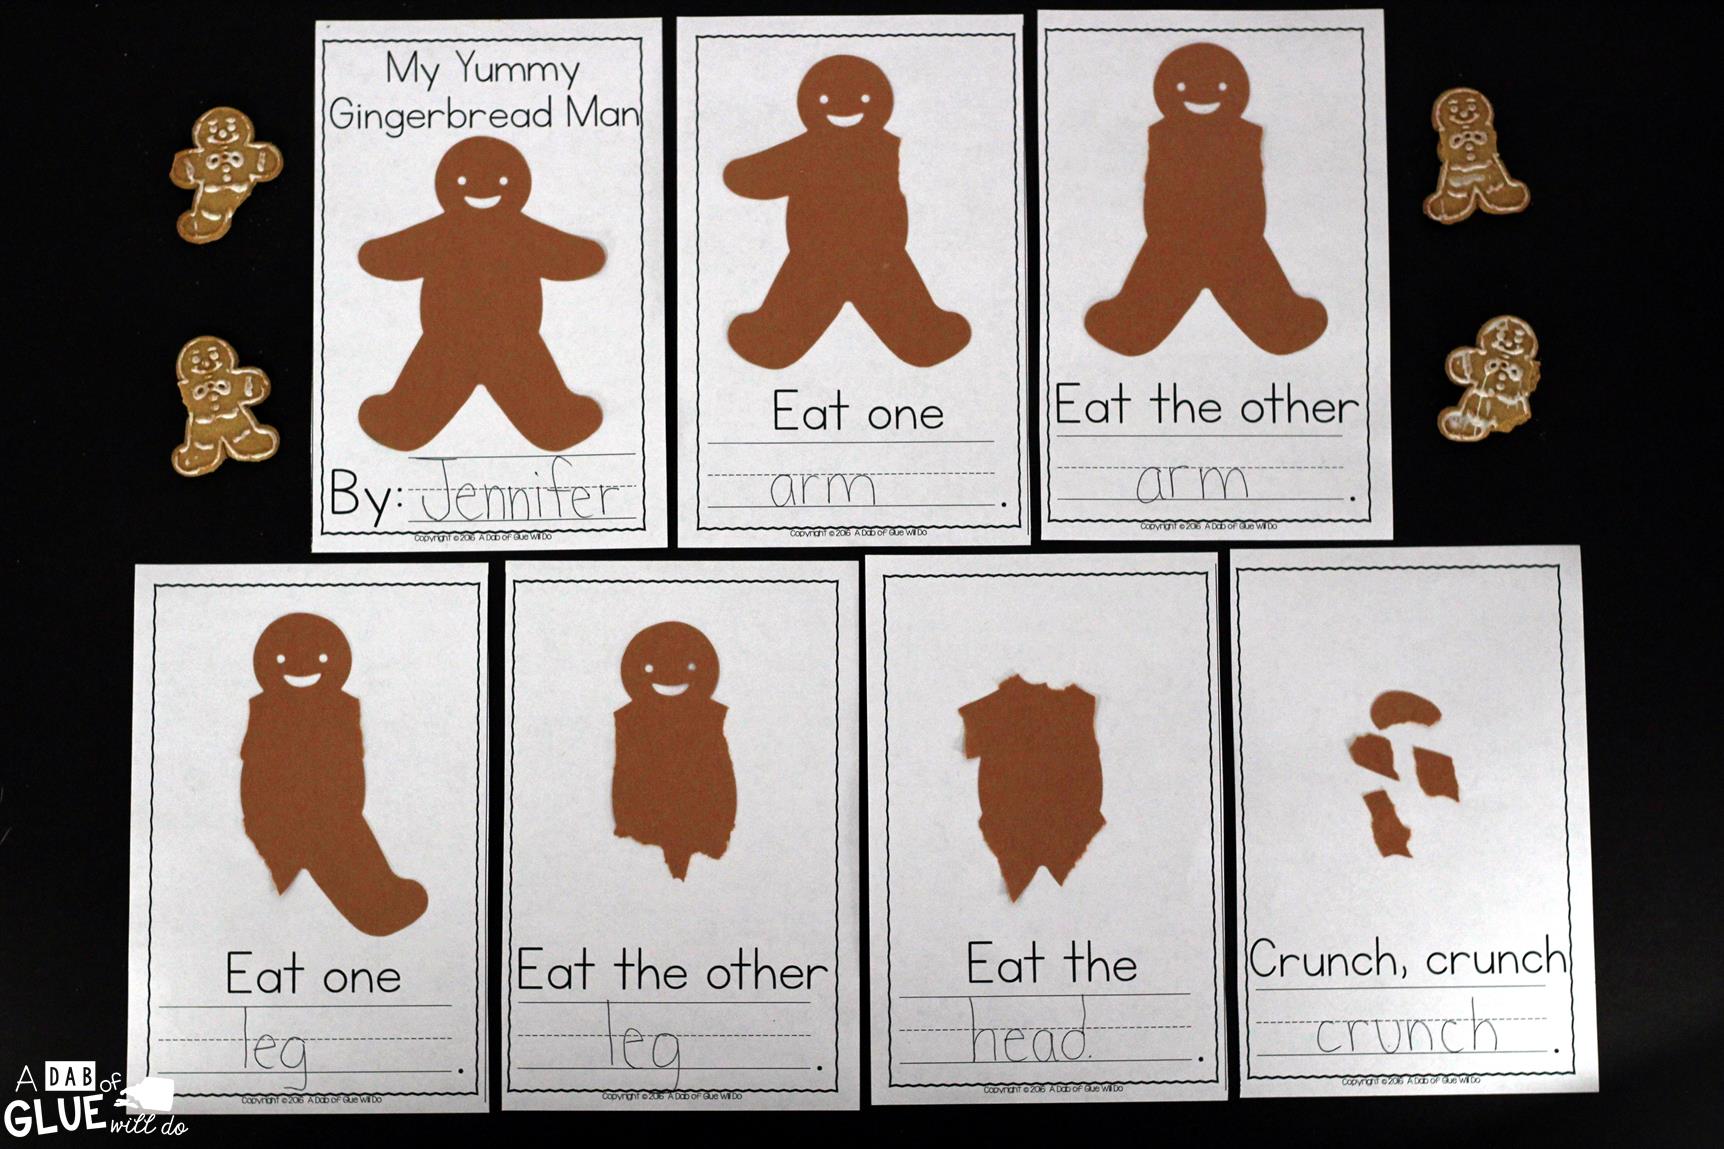 My Yummy Gingerbread Book is the perfect hands-on activity to do with your preschool, kindergarten, or first grade students. This free printable allows students to listen and follow directions, while having fun. It is perfect for the Christmas and holiday season.